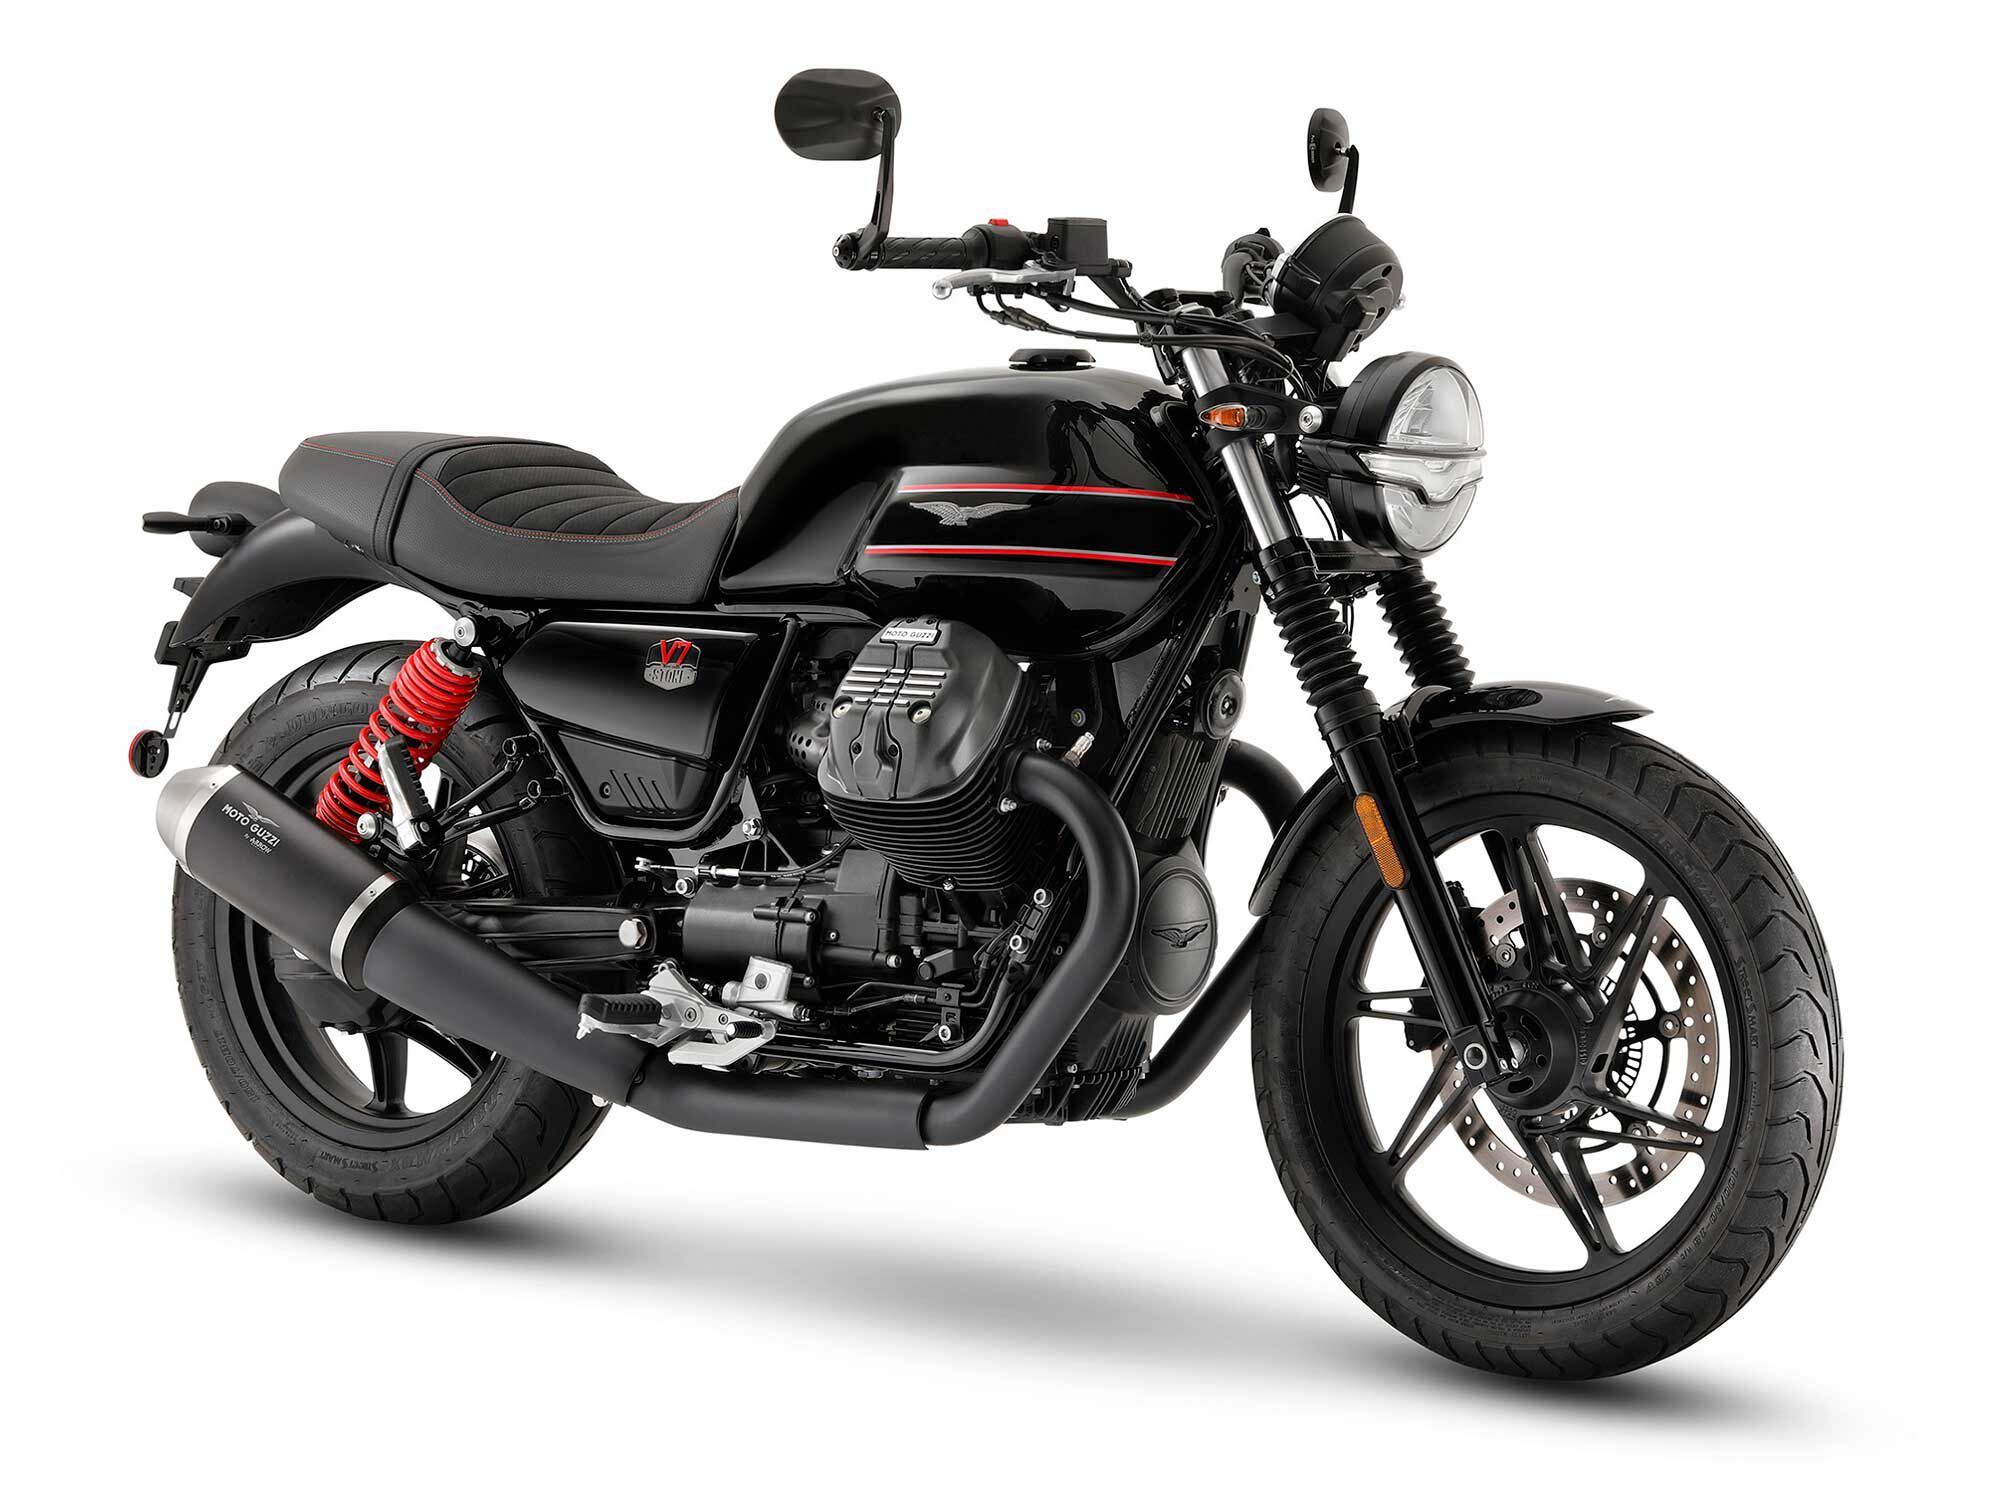 Moto Guzzi’s new V7 Stone Special Edition was just unveiled at the Guzzi World Days celebration in Italy.